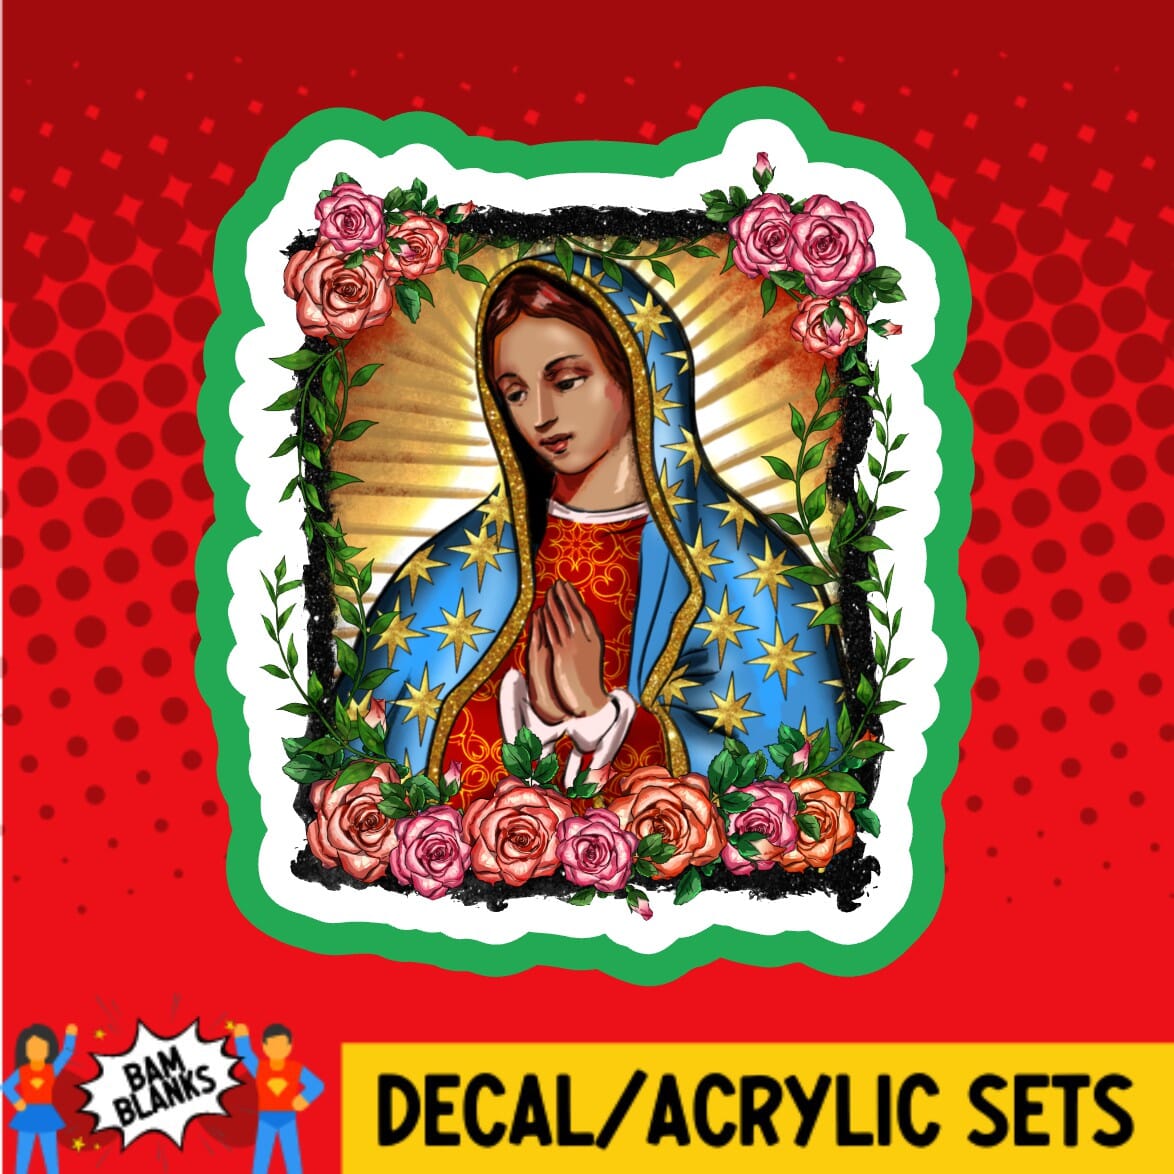 Our Lady of Guadalupe Portrait - DECAL AND ACRYLIC SHAPE #DA02092